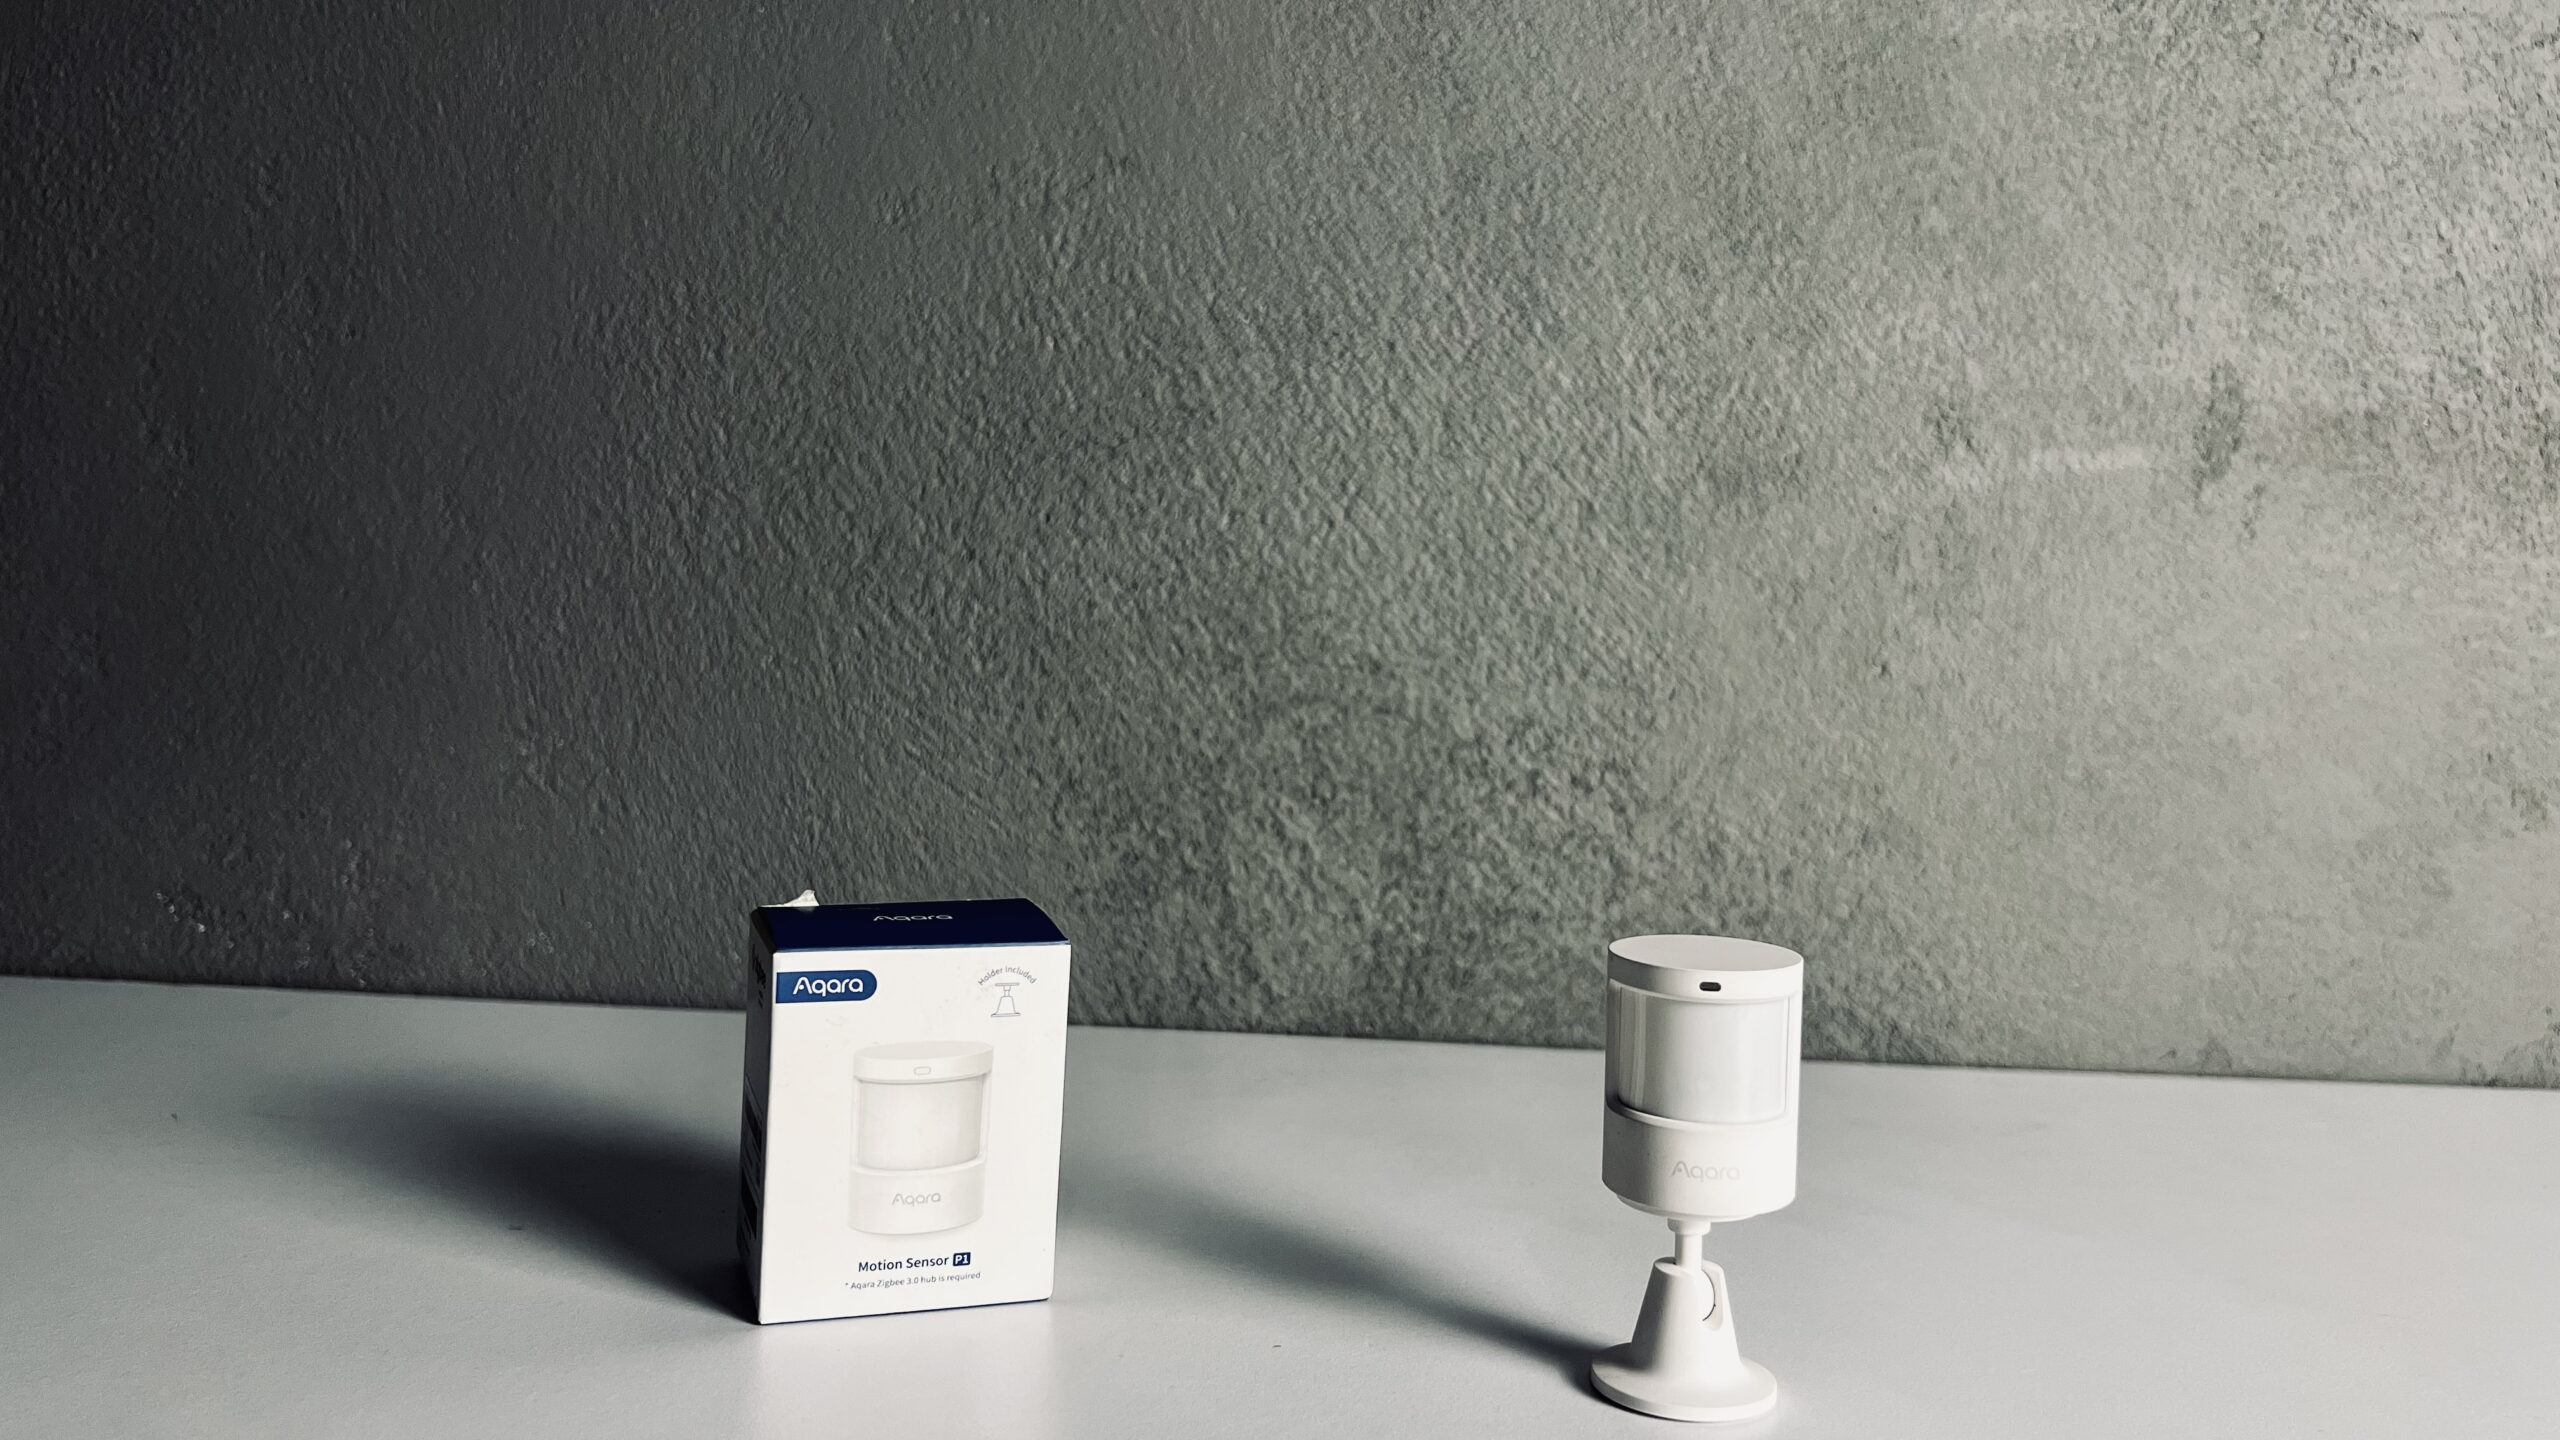 Aqara P1 motion sensor with packaging on white surface against gray background